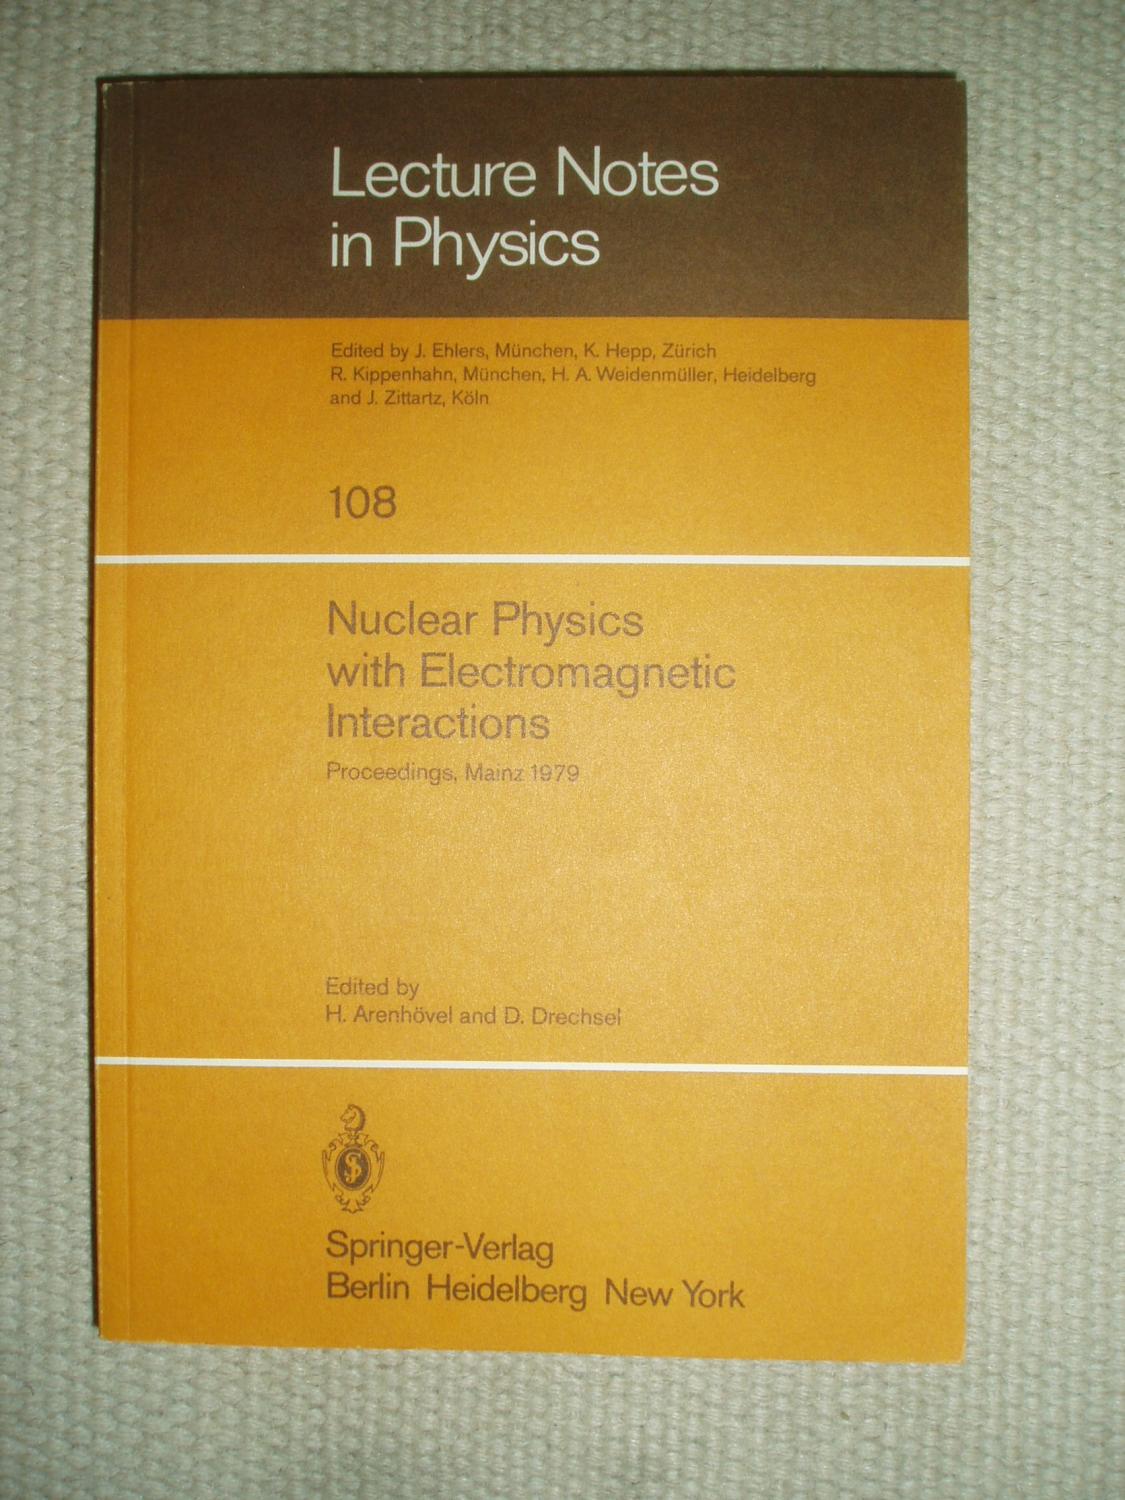 Nuclear Physics with Electromagnetic Interactions: Proceedings of the International Conference, Held in Mainz, Germany, June 5-9, 1979 (Lecture Notes in Physics (108), Band 108)